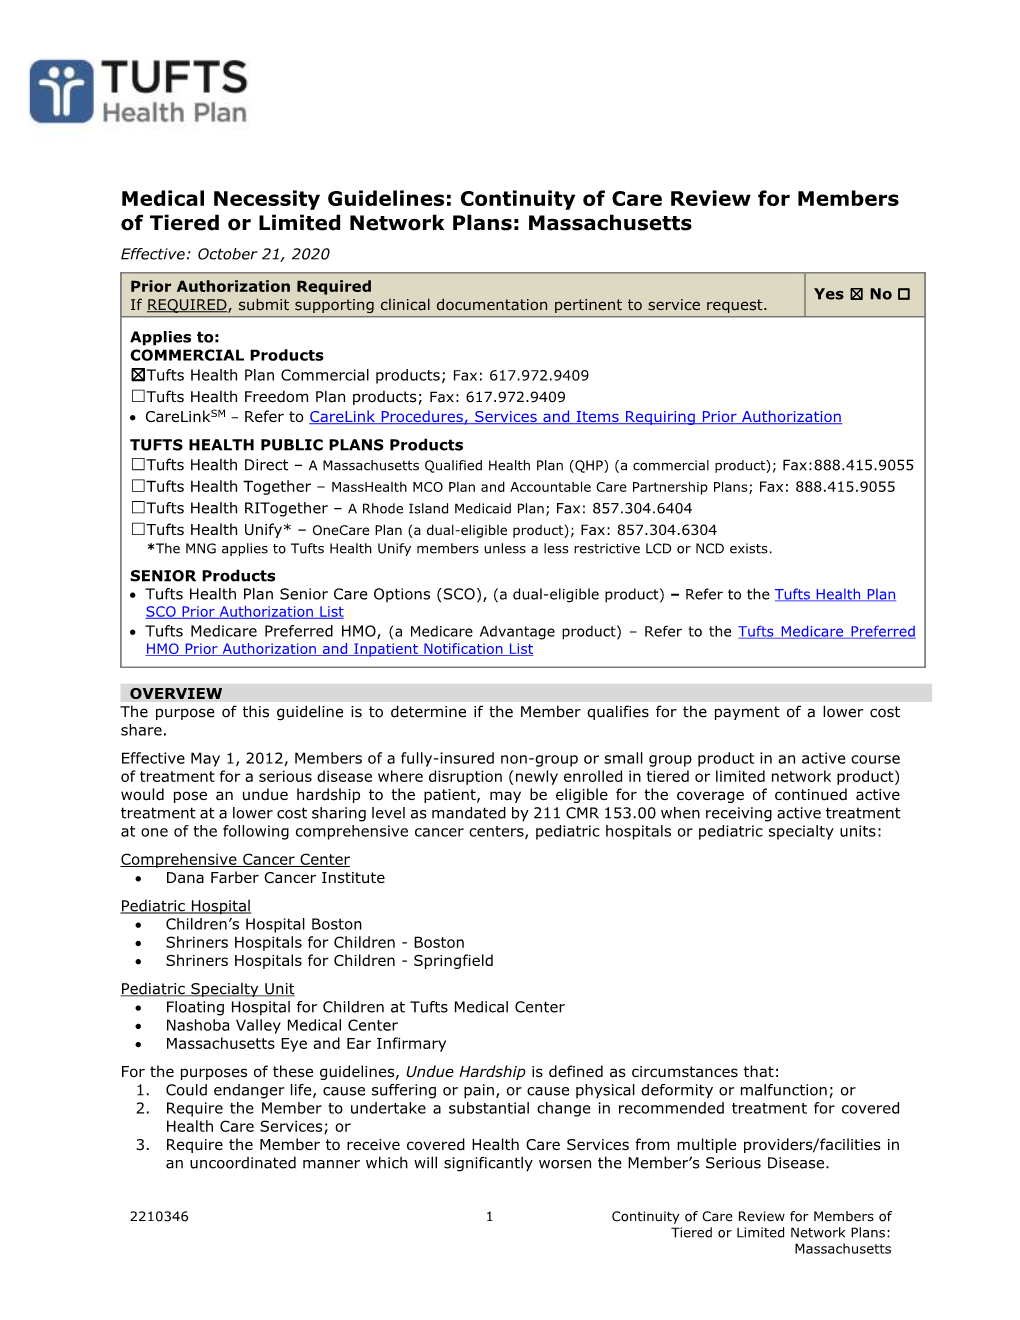 Medical Necessity Guidelines: Continuity of Care Review for Members of Tiered Or Limited Network Plans: Massachusetts Effective: October 21, 2020